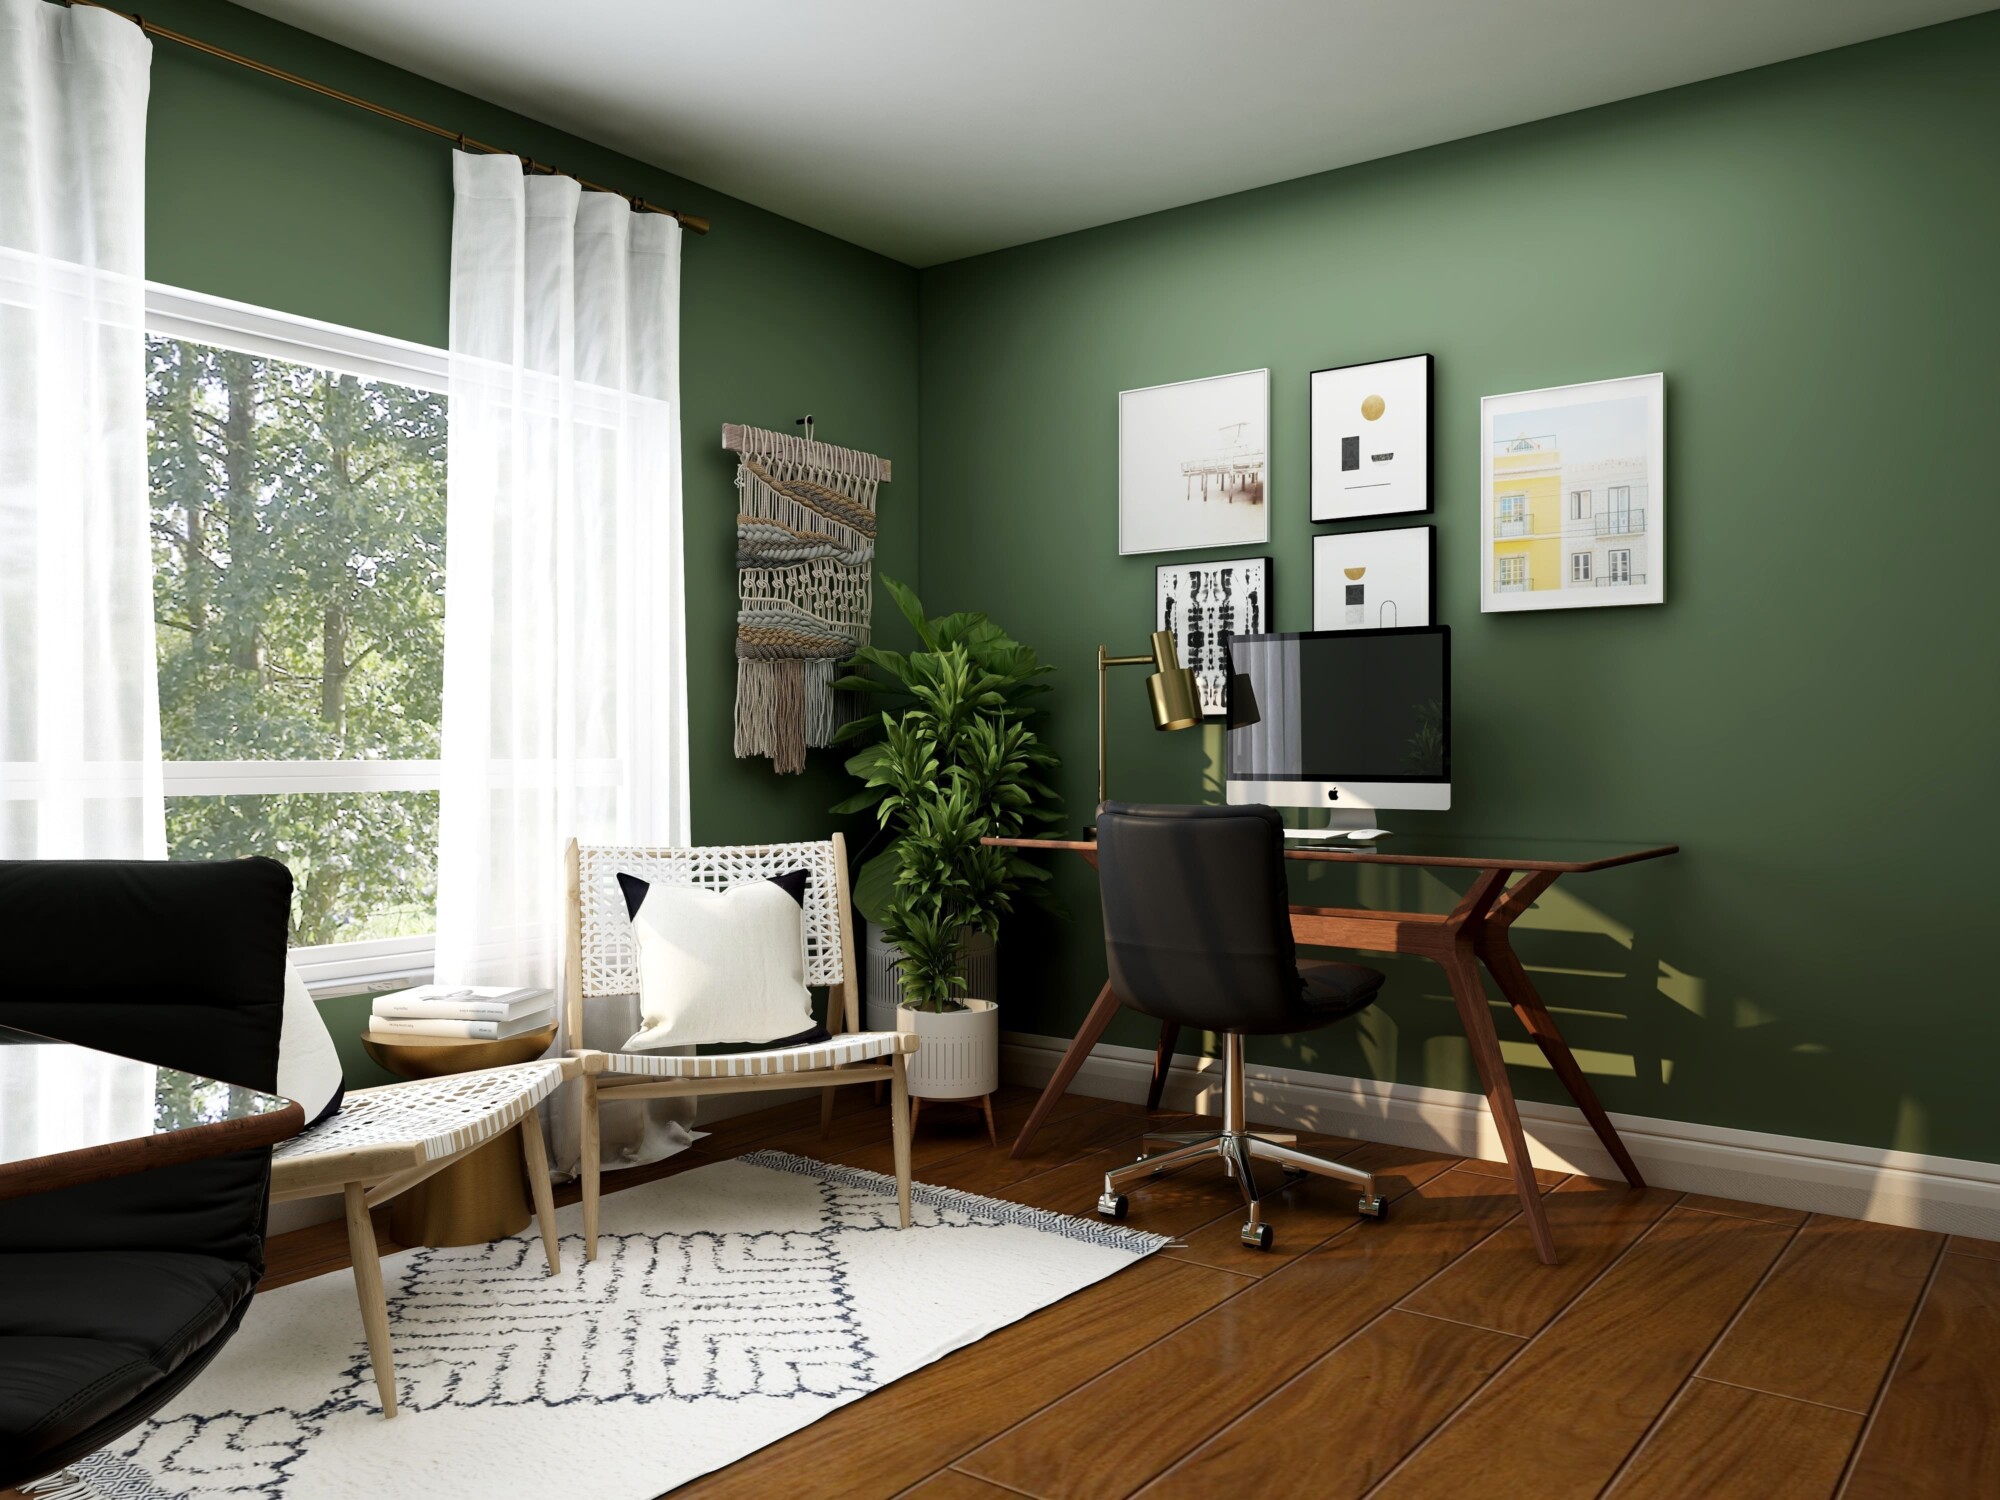 A home office with green walls, paintings above the desk computer and wooden flooring around